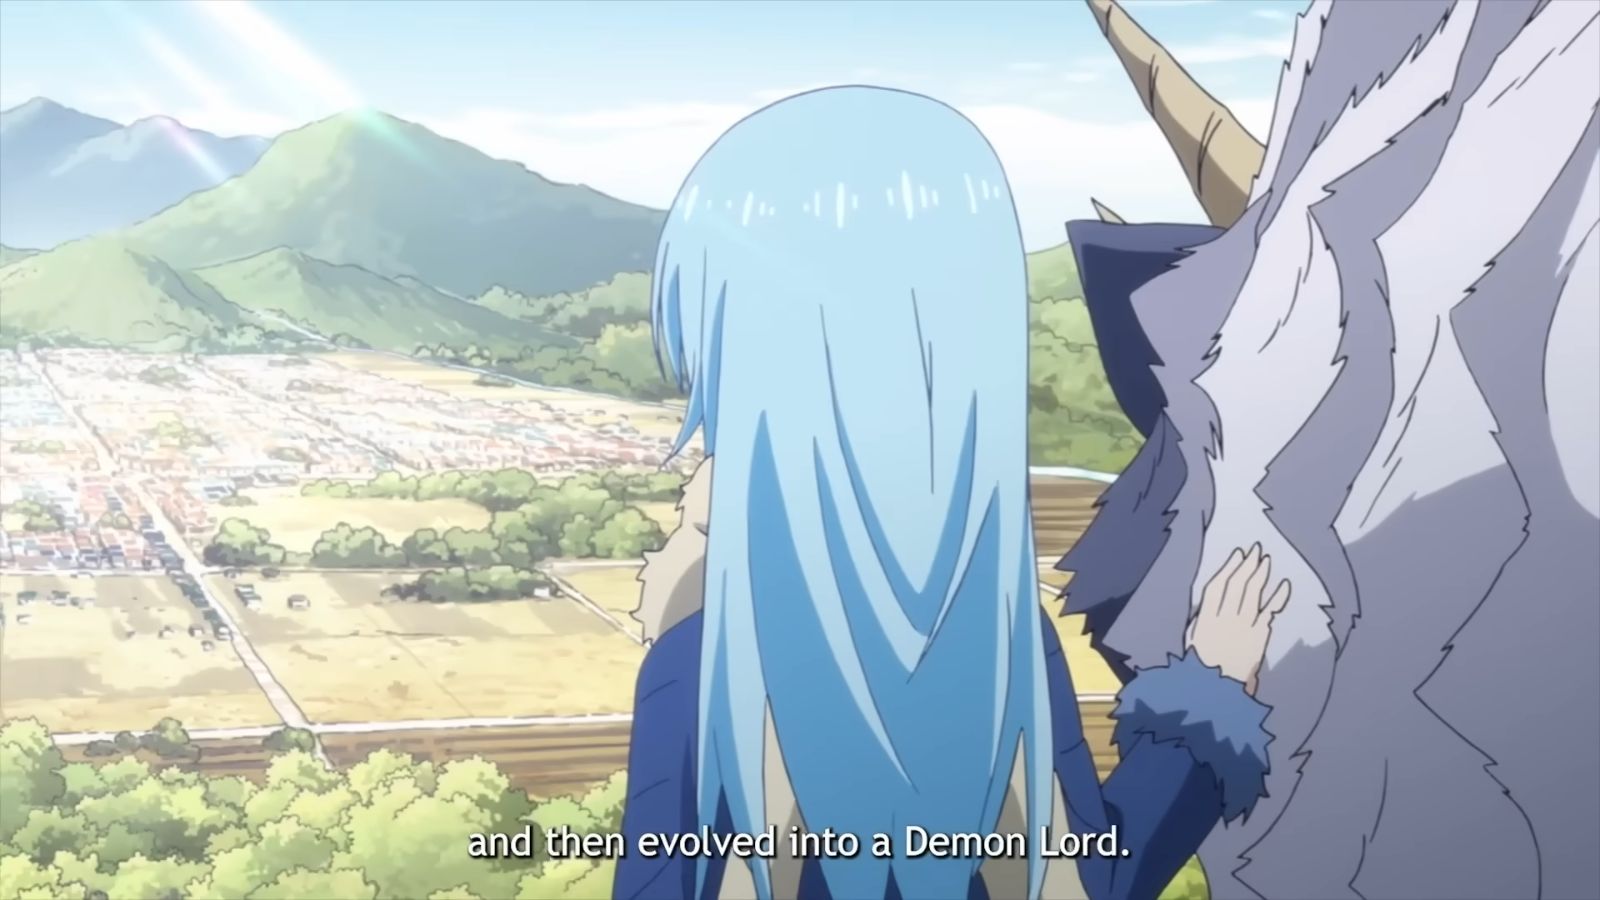 That Time I Got Reincarnated as a Slime' 3rd season gets much